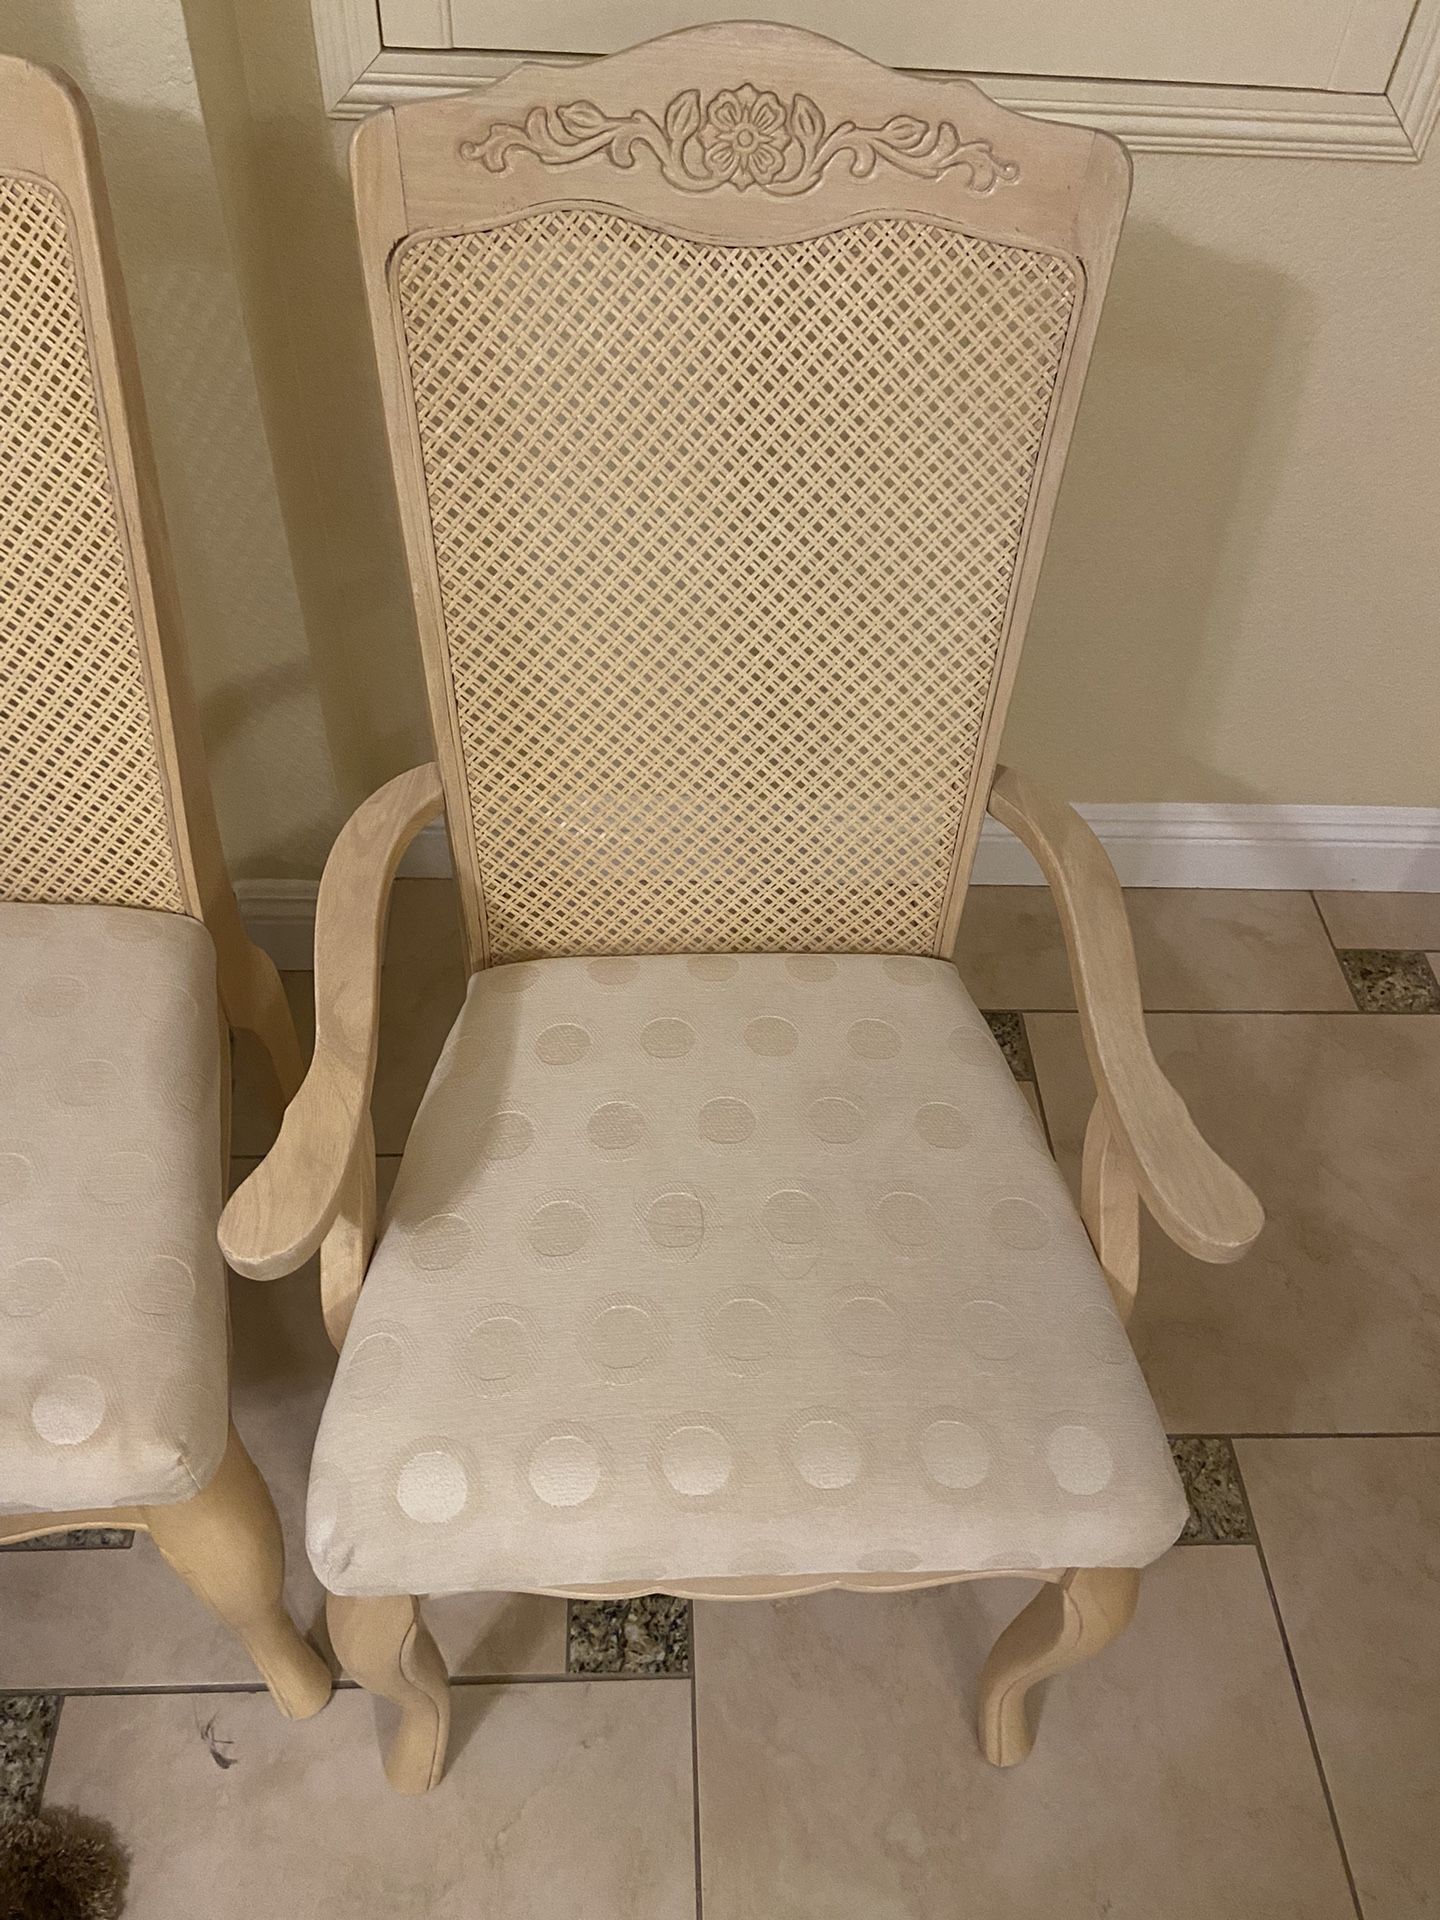 3 Chairs Good Condition!